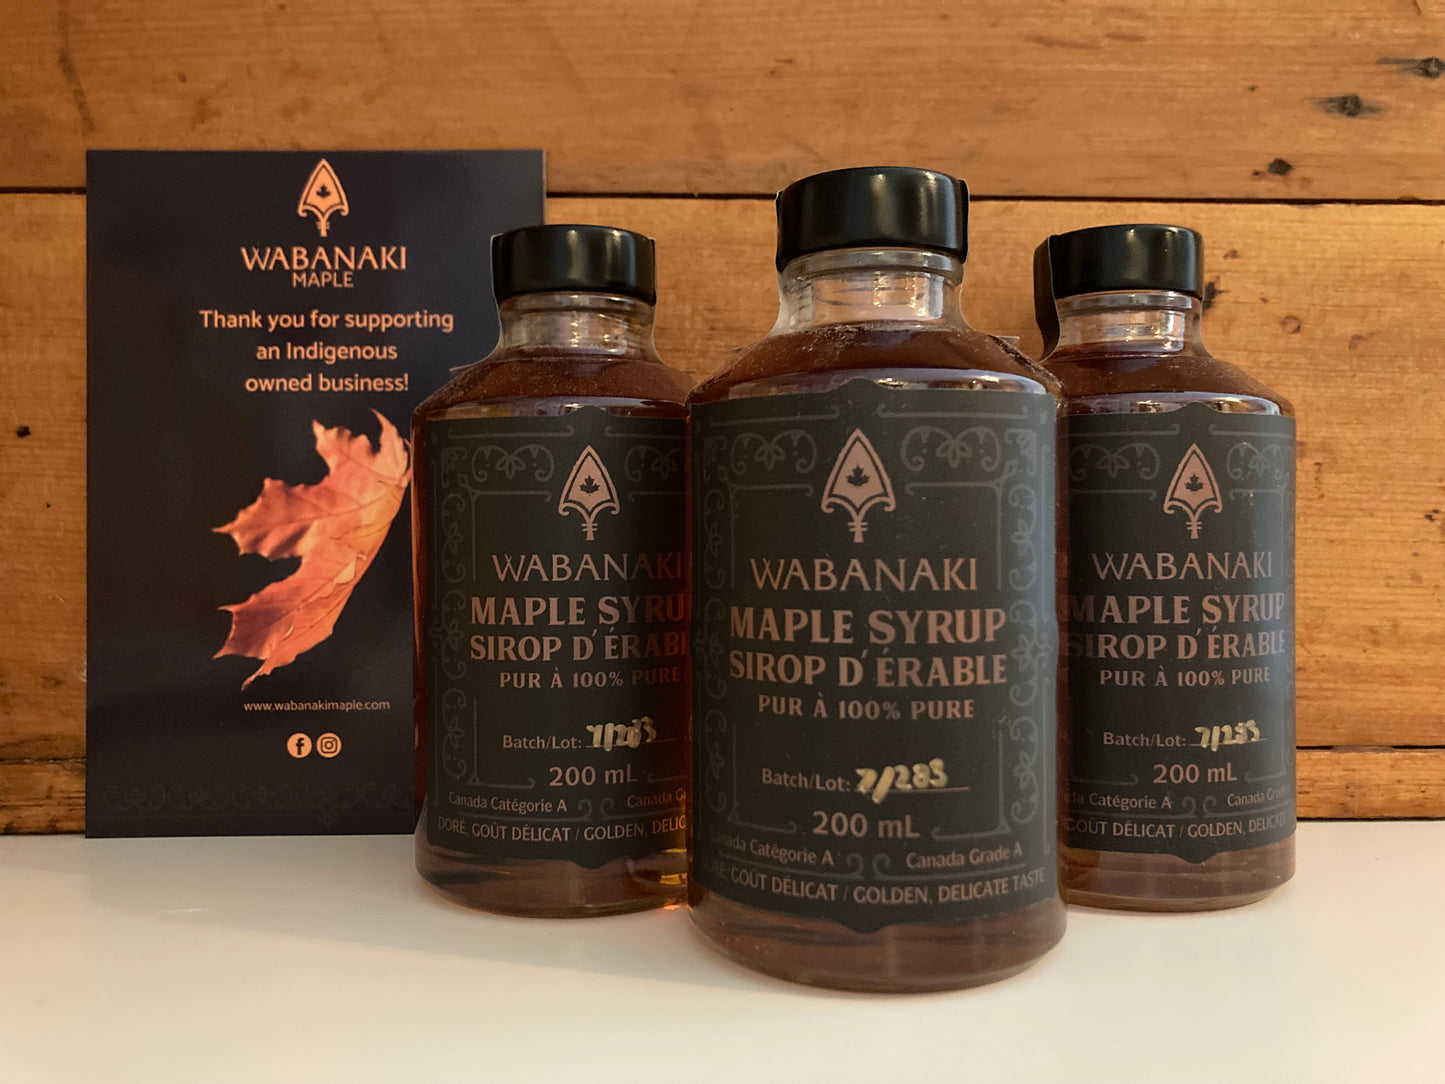 MAPLE SYRUP from Wabanaki First Nations